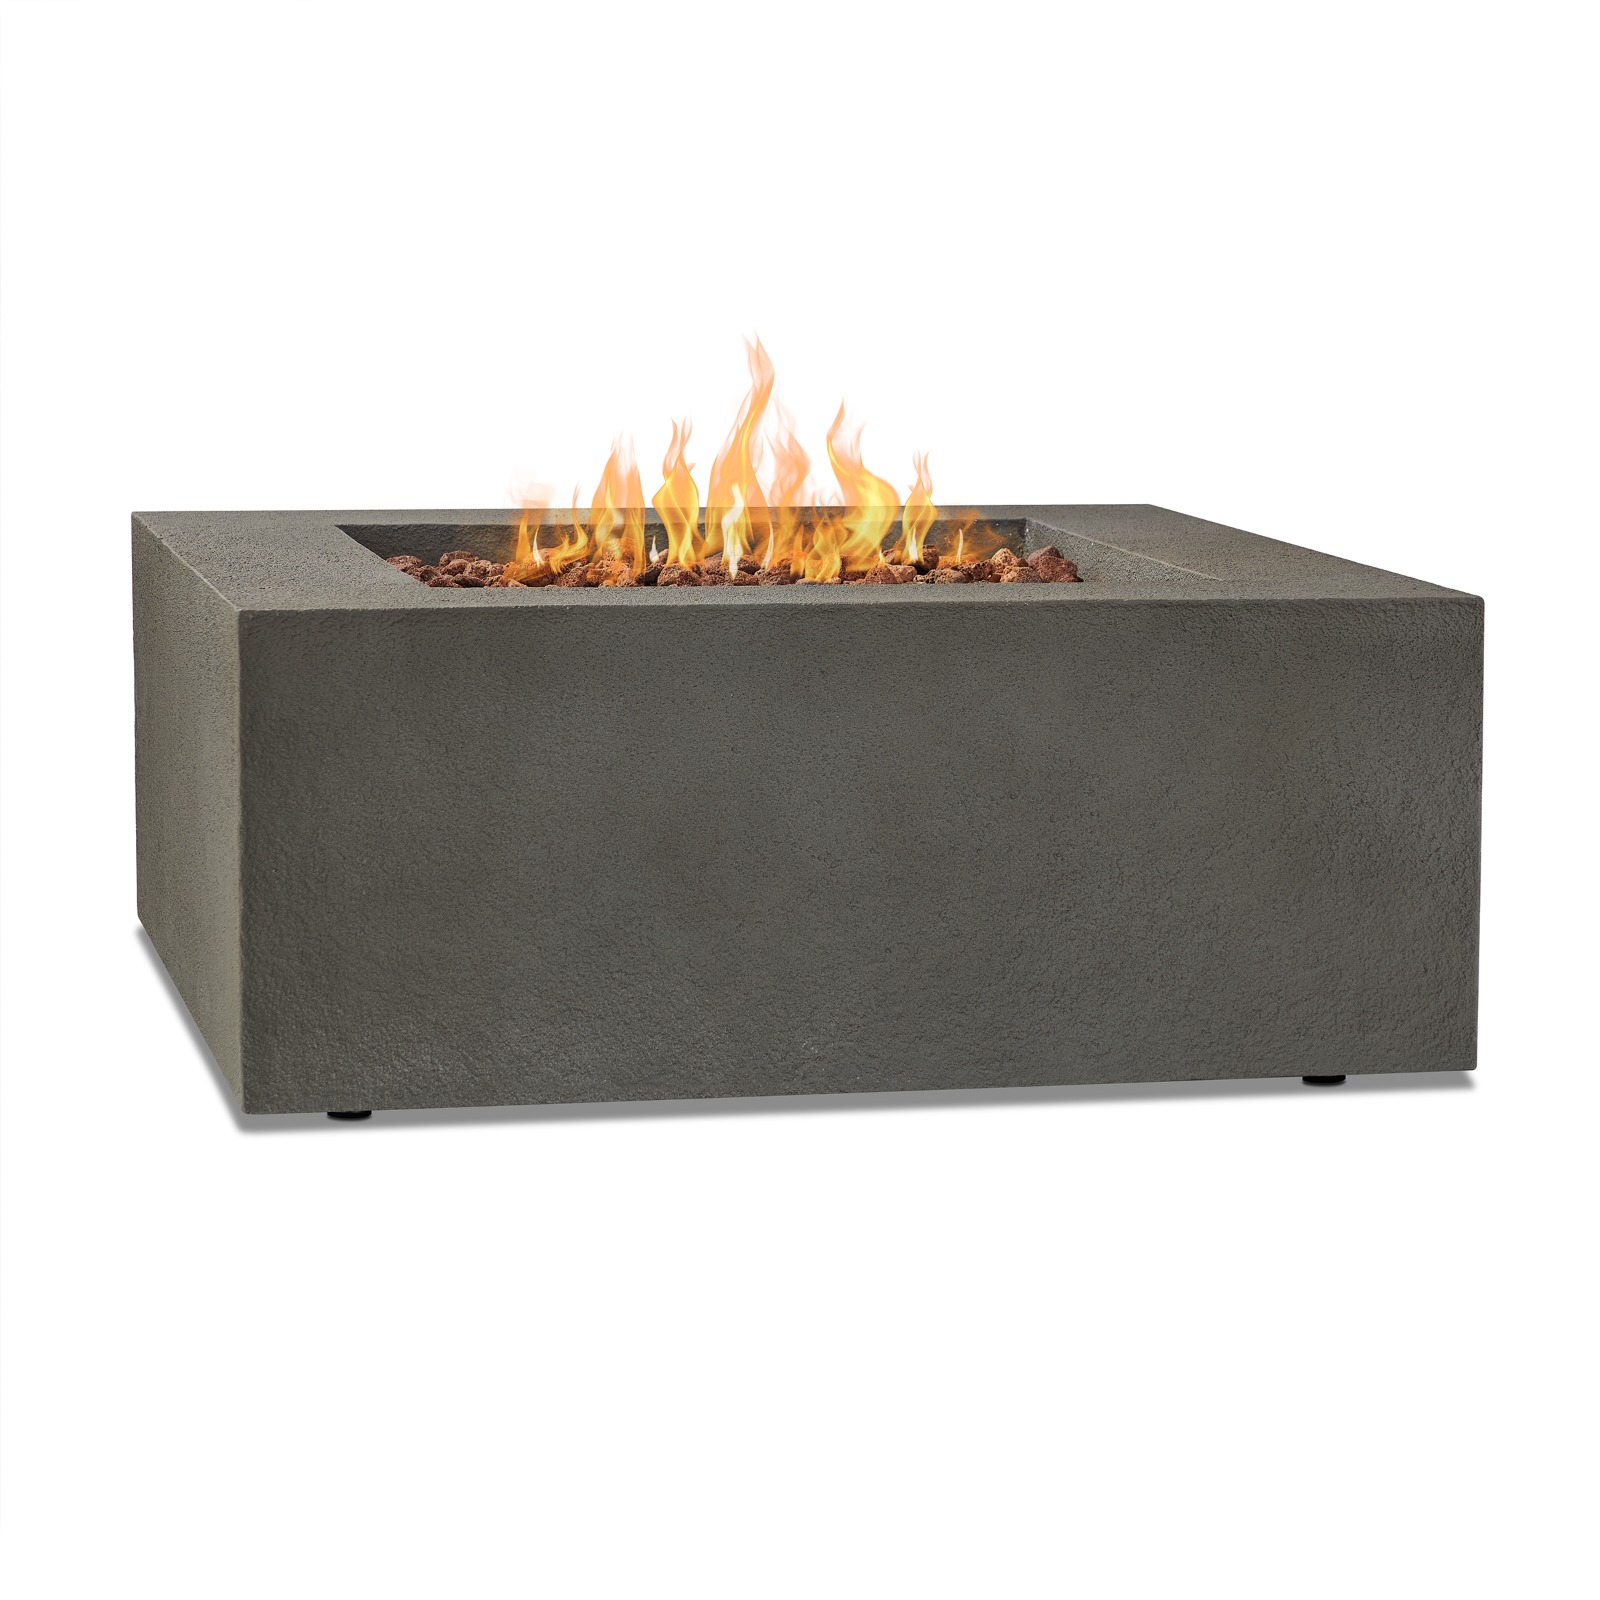 Baltic Square Natural Gas or Propane Fire Pit Outdoor Fireplace Fire Table for Backyard or Patio